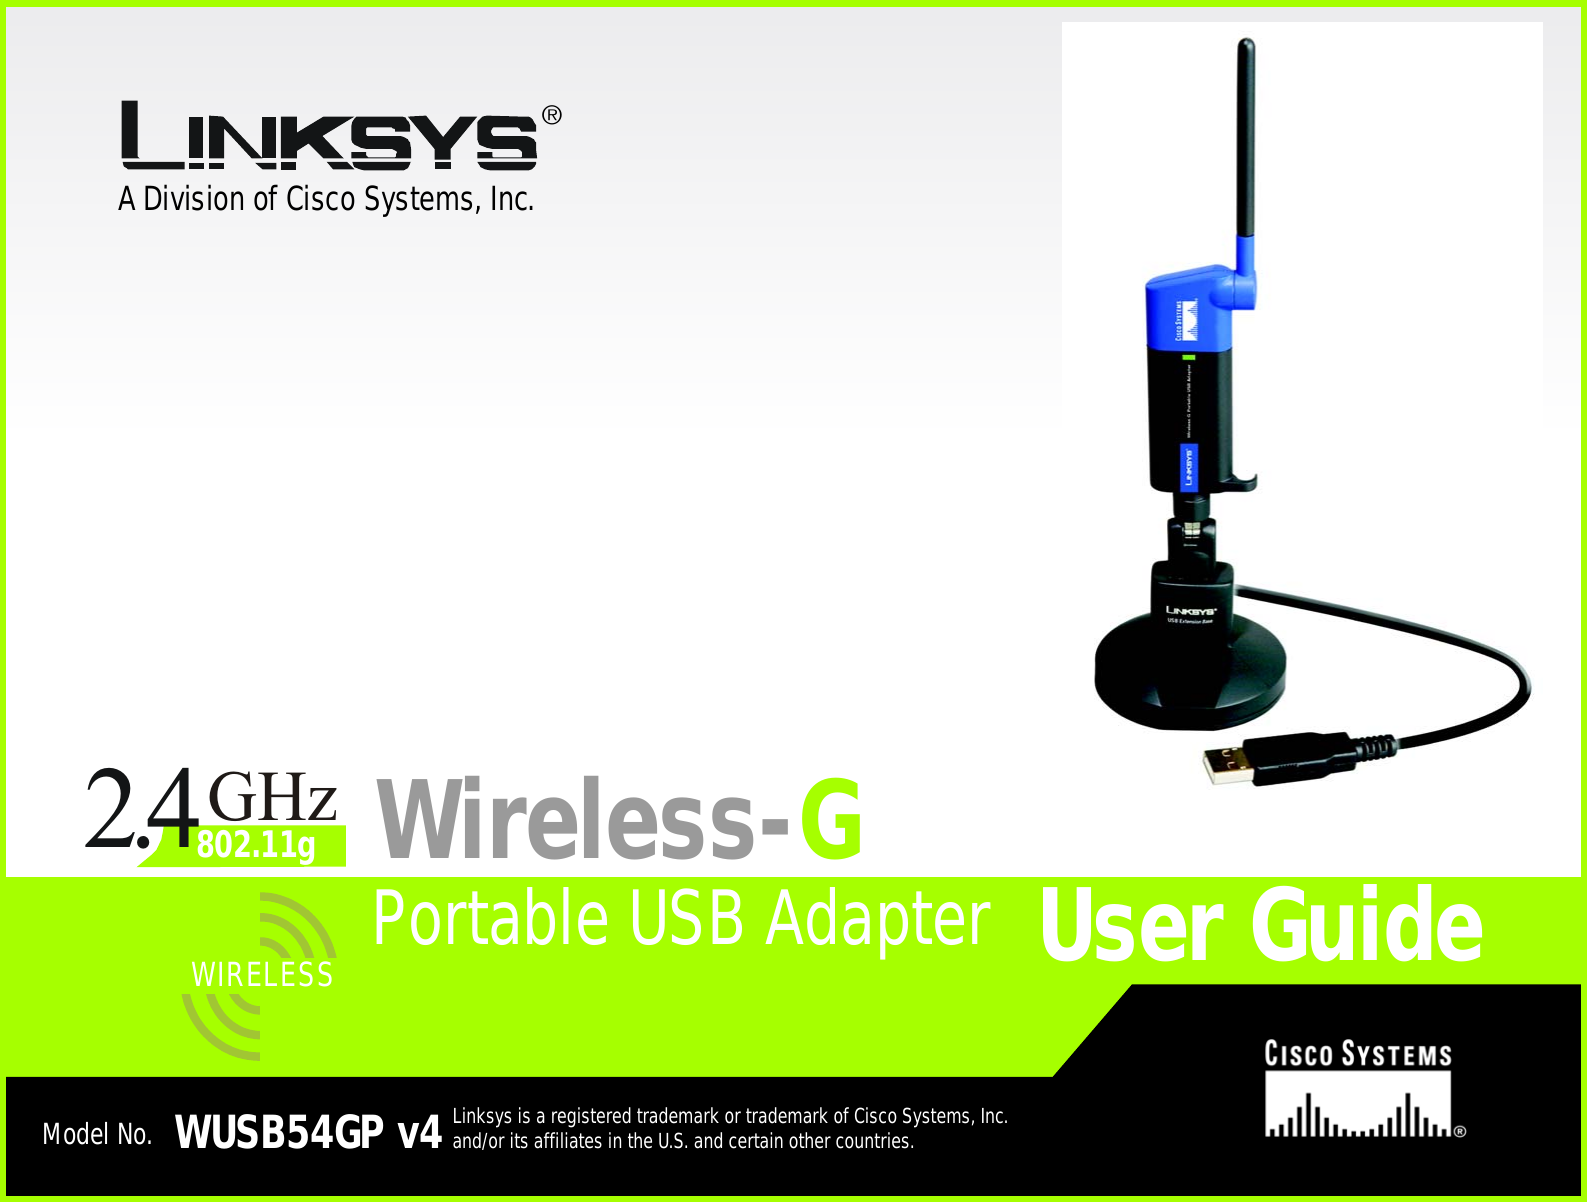 A Division of Cisco Systems, Inc.®Model No.Portable USB AdapterWireless-GWUSB54GP v4 Linksys is a registered trademark or trademark of Cisco Systems, Inc. and/or its affiliates in the U.S. and certain other countries.User GuideWIRELESSGHz2.4802.11g